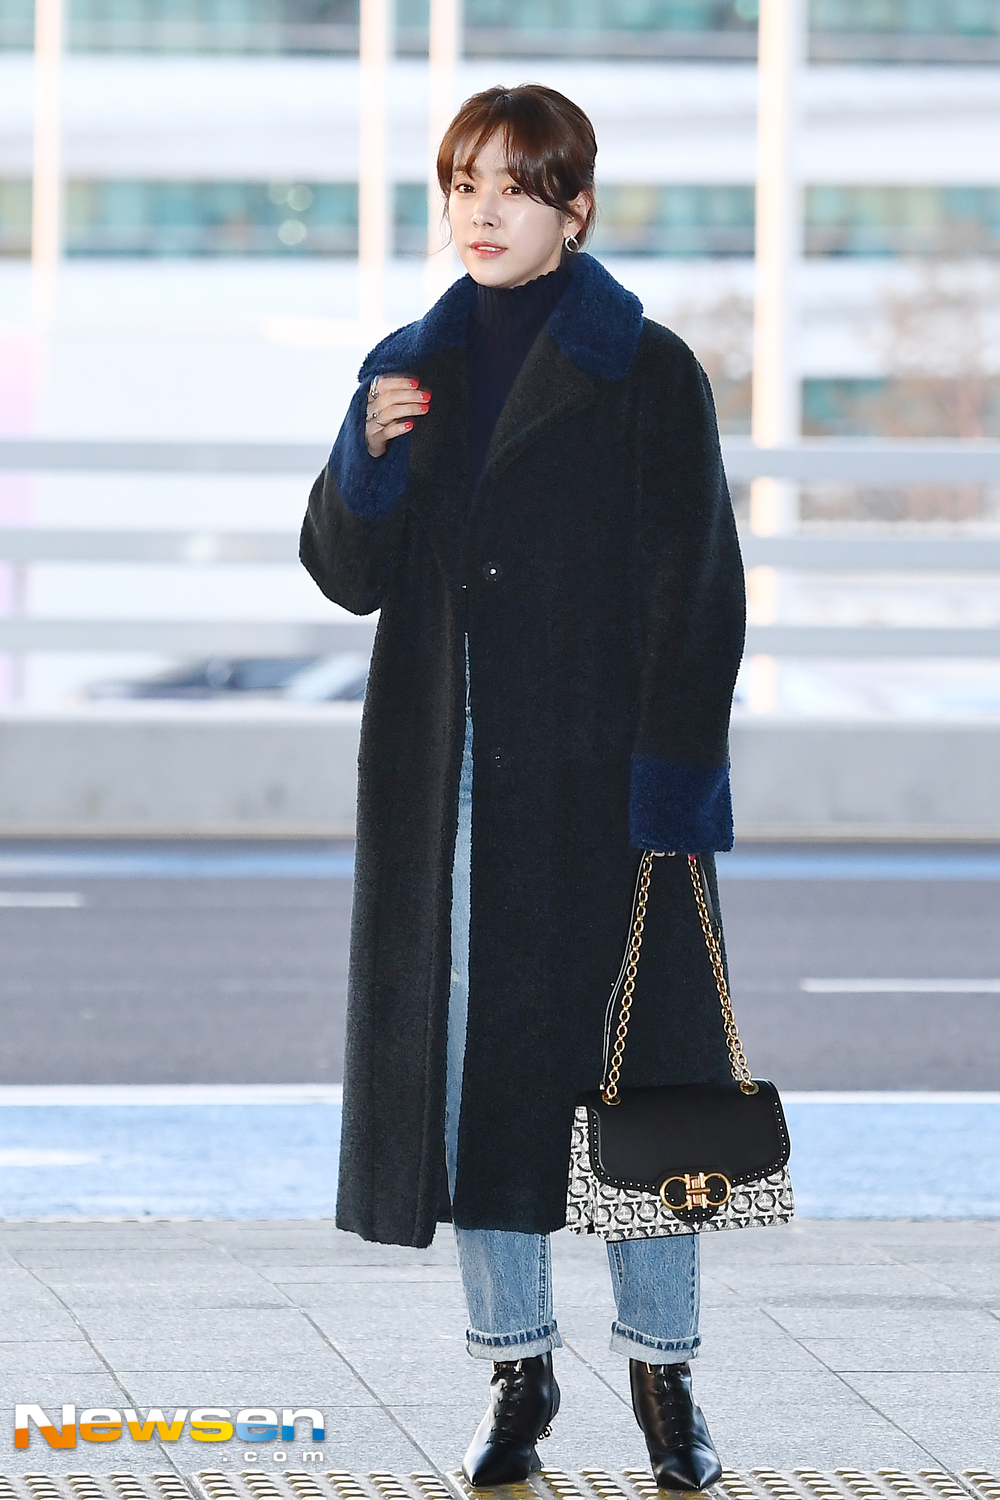 Actor Han Ji-min left for United States of America New York City on the afternoon of January 31 at the New York City Asian Film Festival (NYAFF) through the Incheon International Airport in Unseo-dong, Jung-gu, Incheon.Actor Han Ji-min is leaving for United States of America New York City with an airport fashion.exponential earthquake